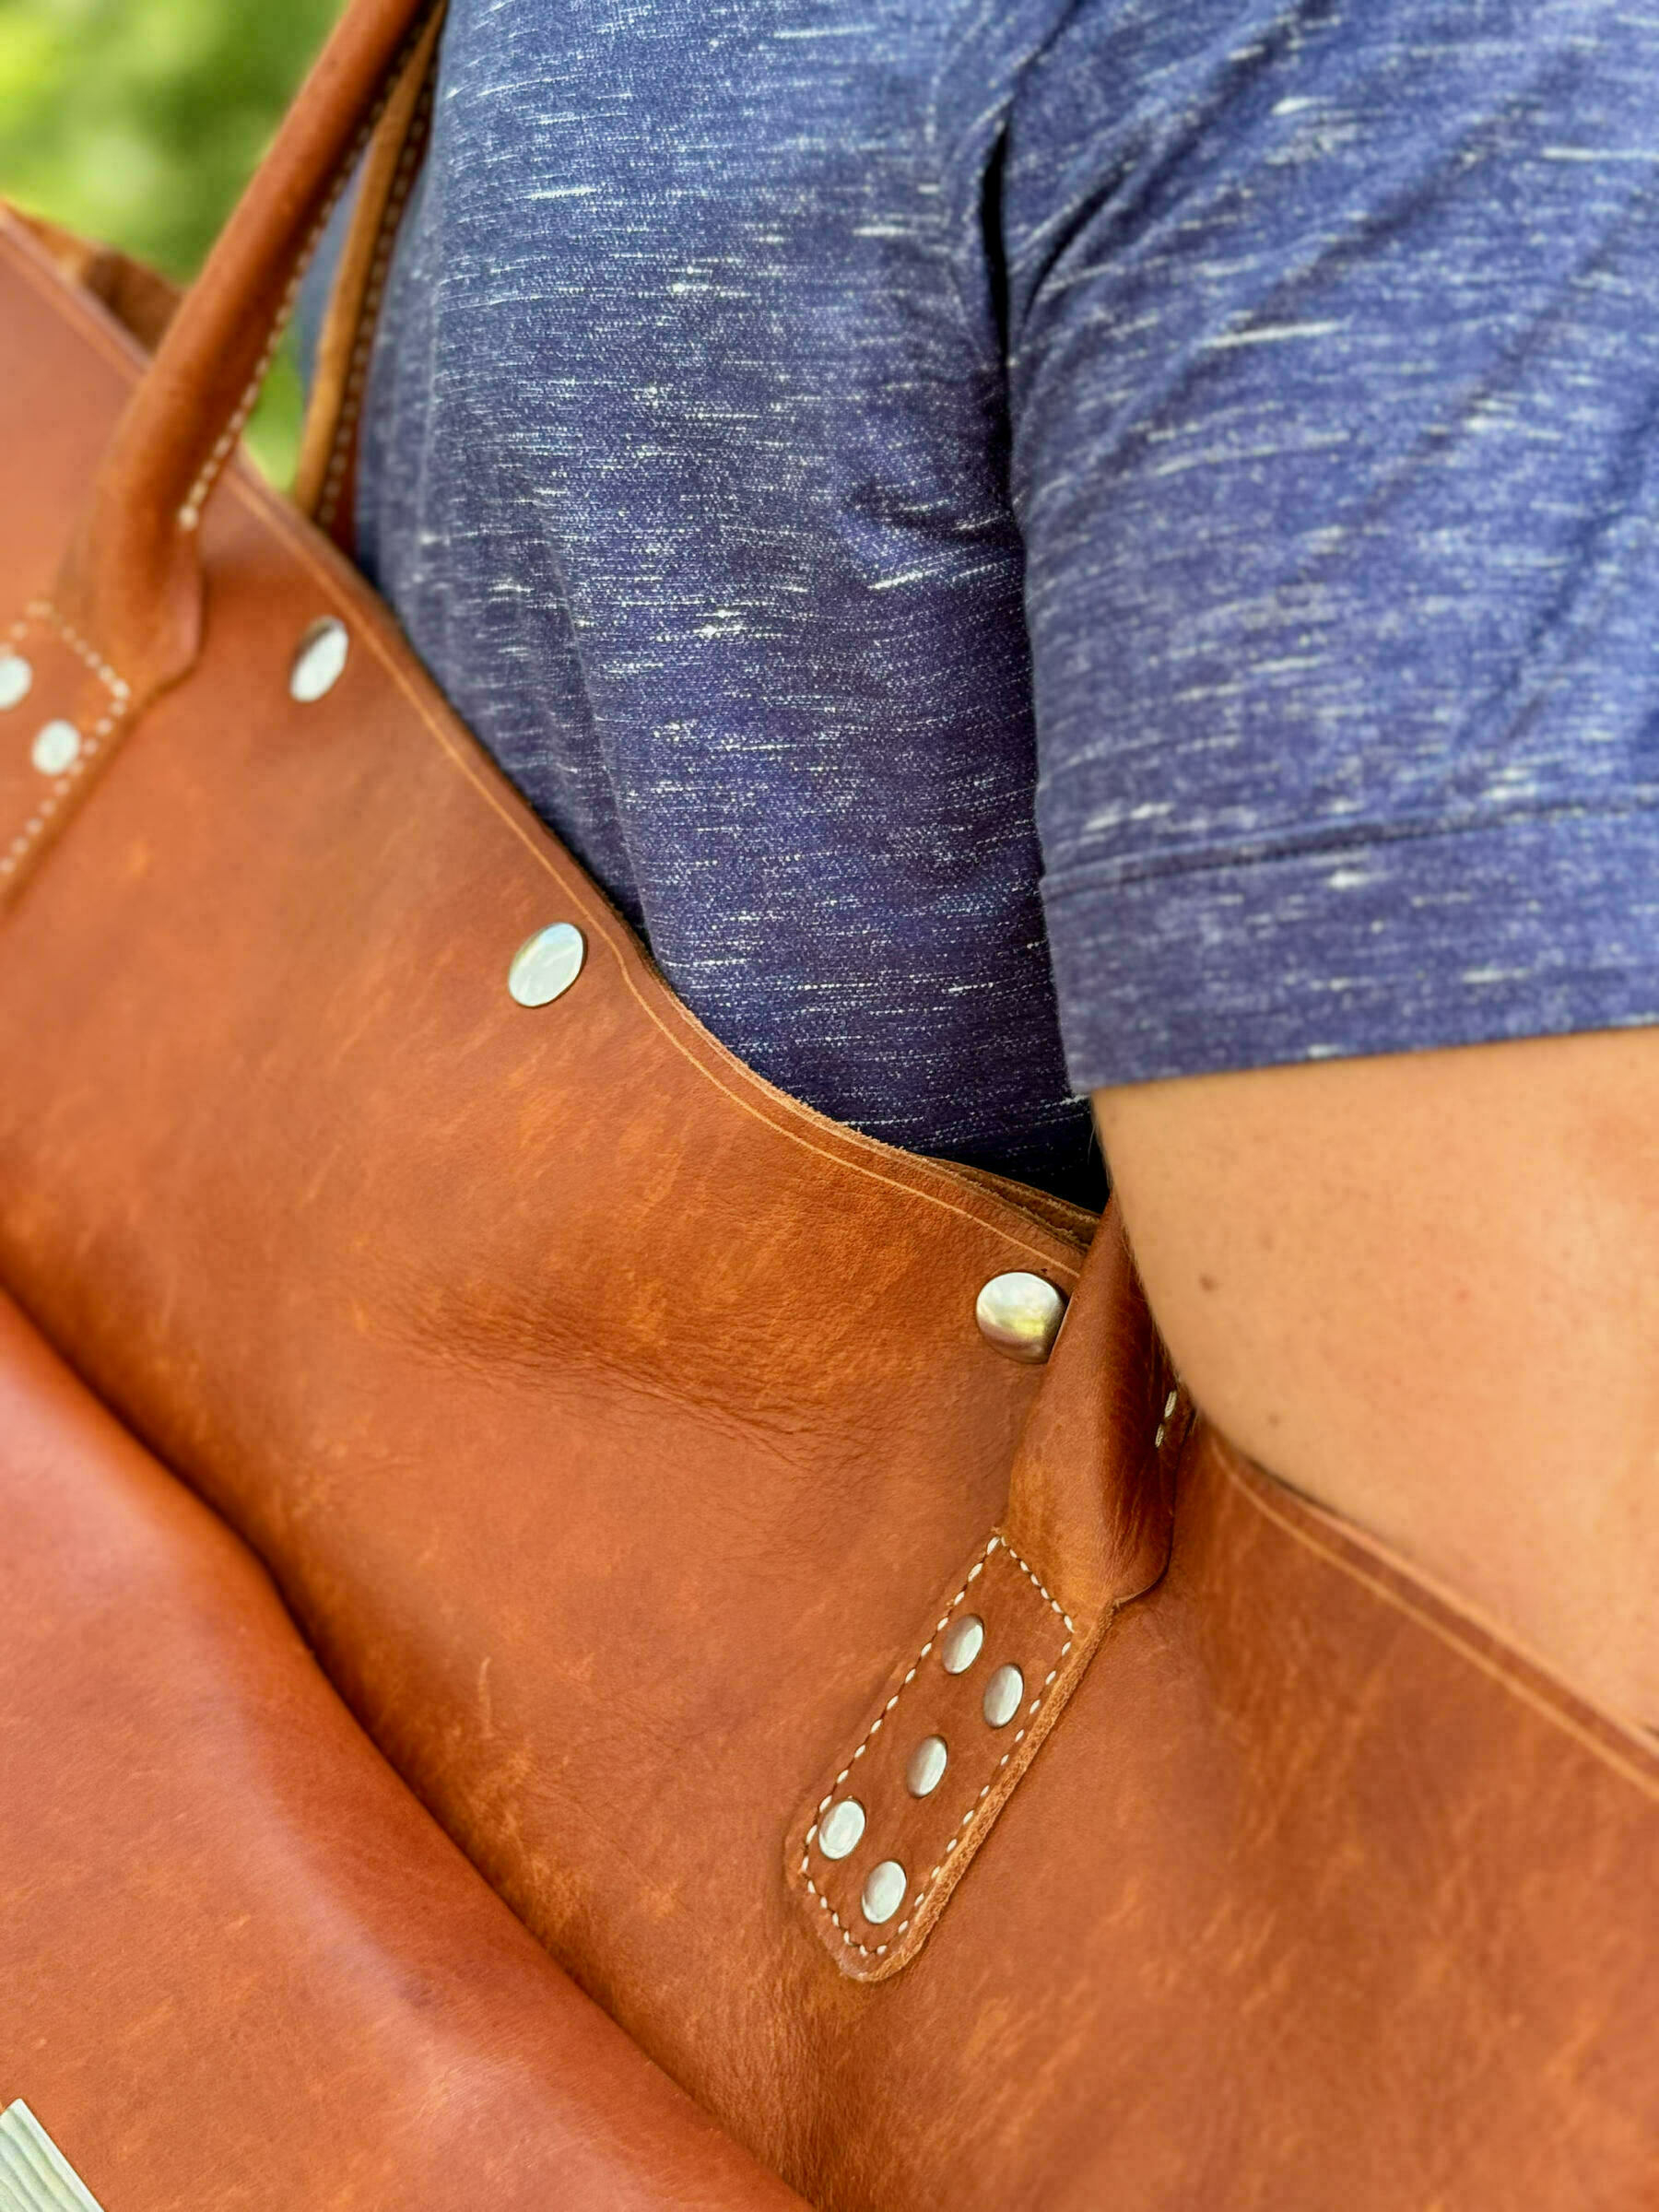 A person wearing a blue shirt carries a brown leather bag with metallic rivets on their shoulder.